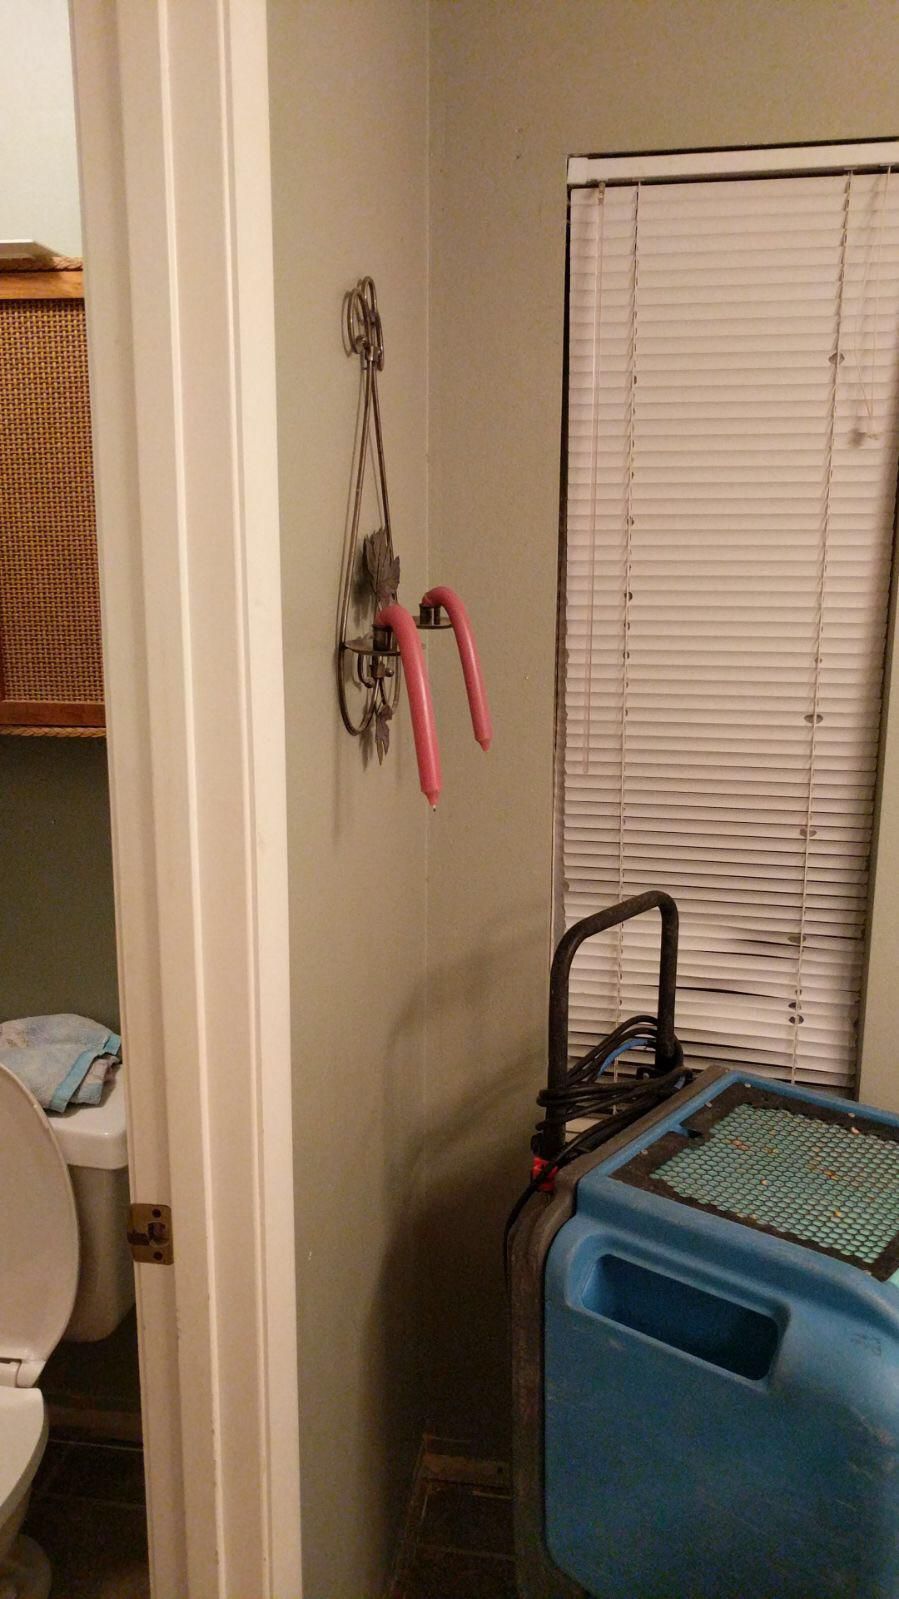 My friend’s house flooded. They had to heat the home up to help dry the water and...